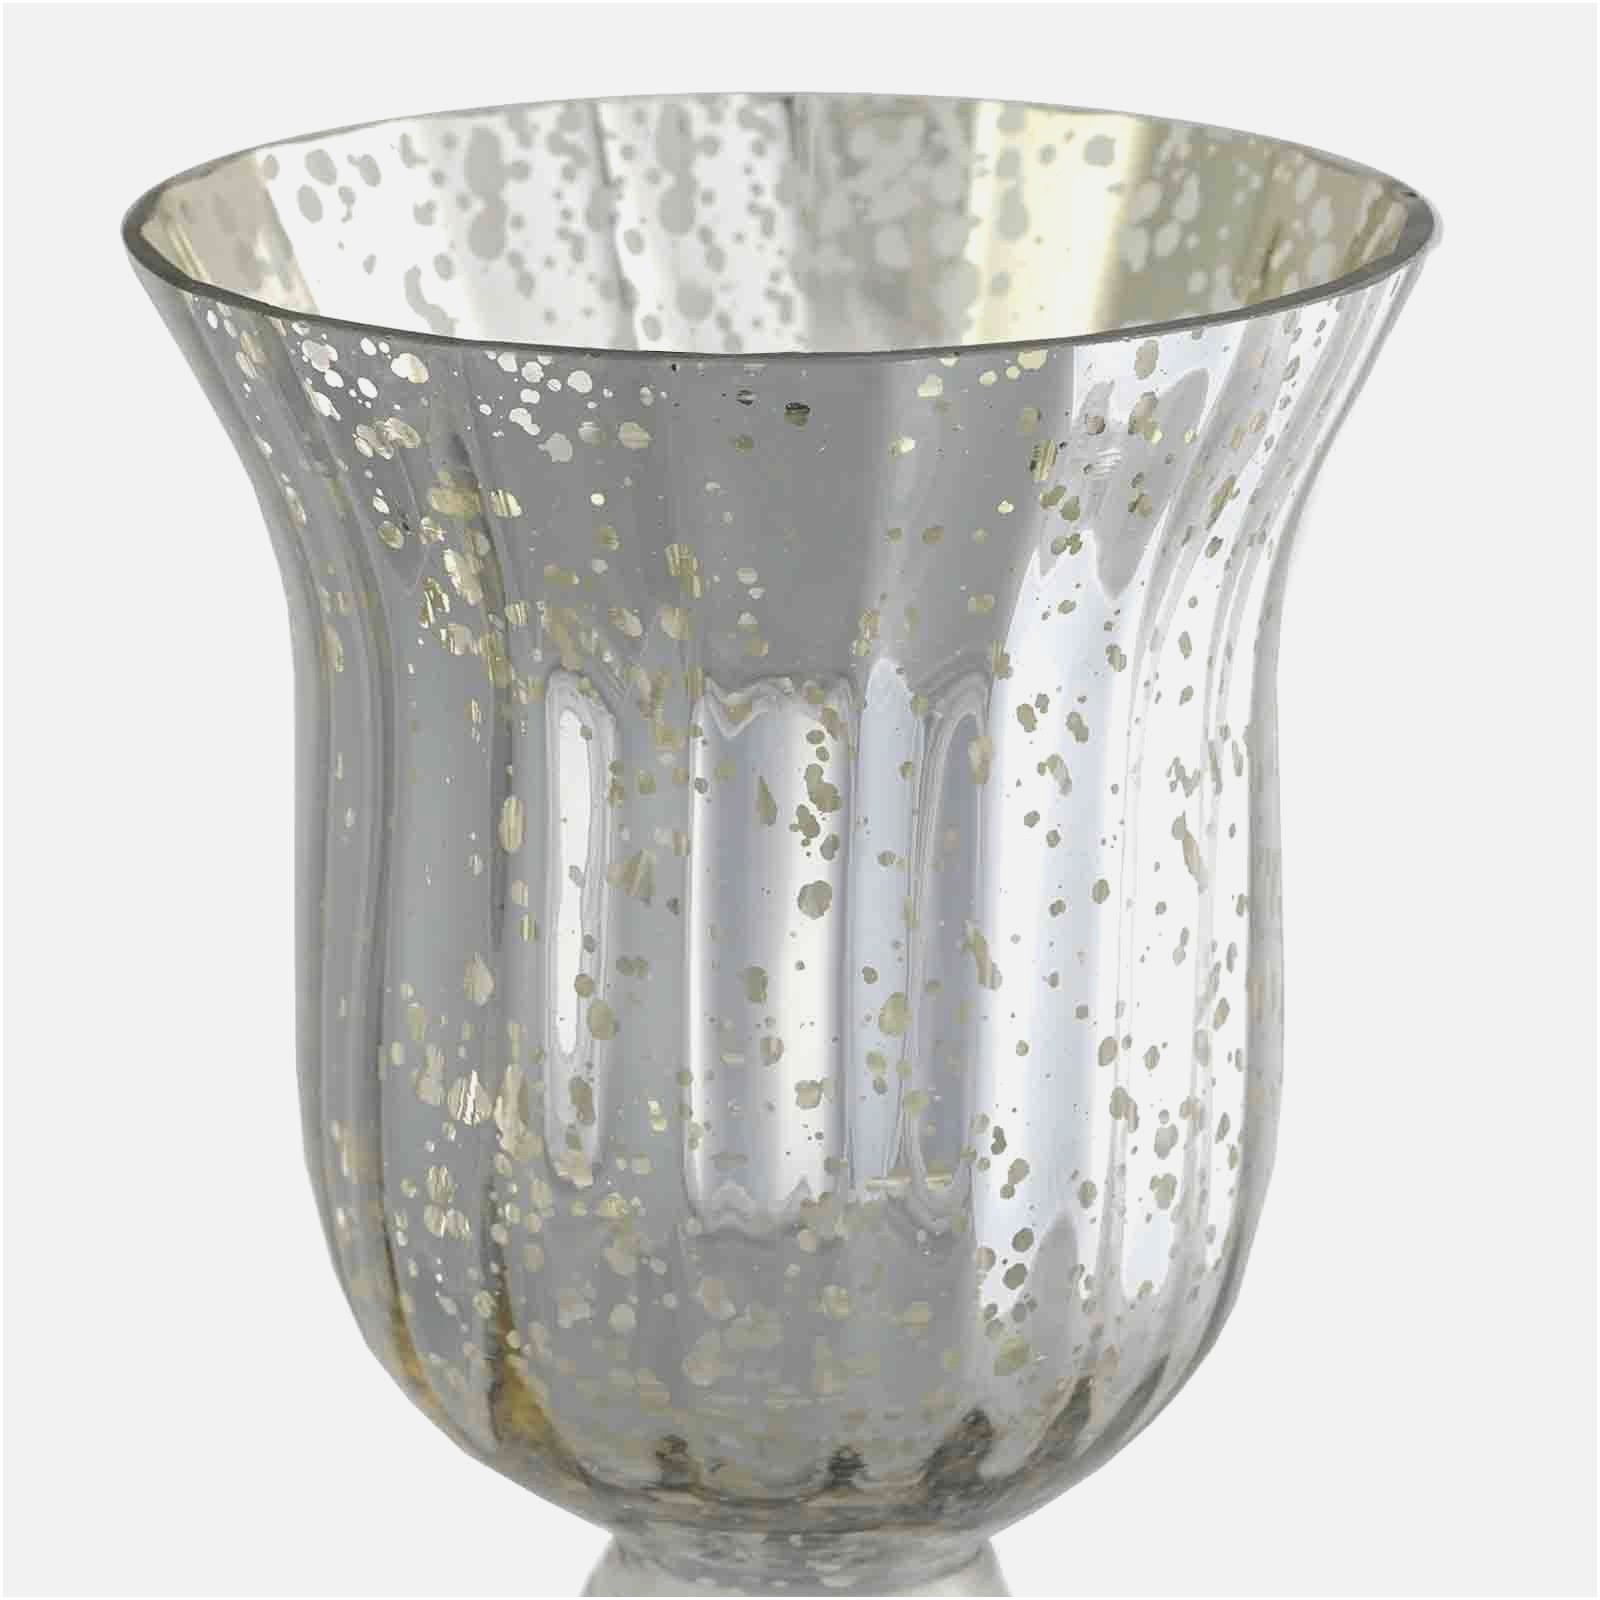 30 attractive Buy Glass Vases wholesale 2024 free download buy glass vases wholesale of 47 new discount wedding favors collection 11158 in discount wedding favors fresh wedding favors candles great pe s5h vases candle vase i 0d bulk